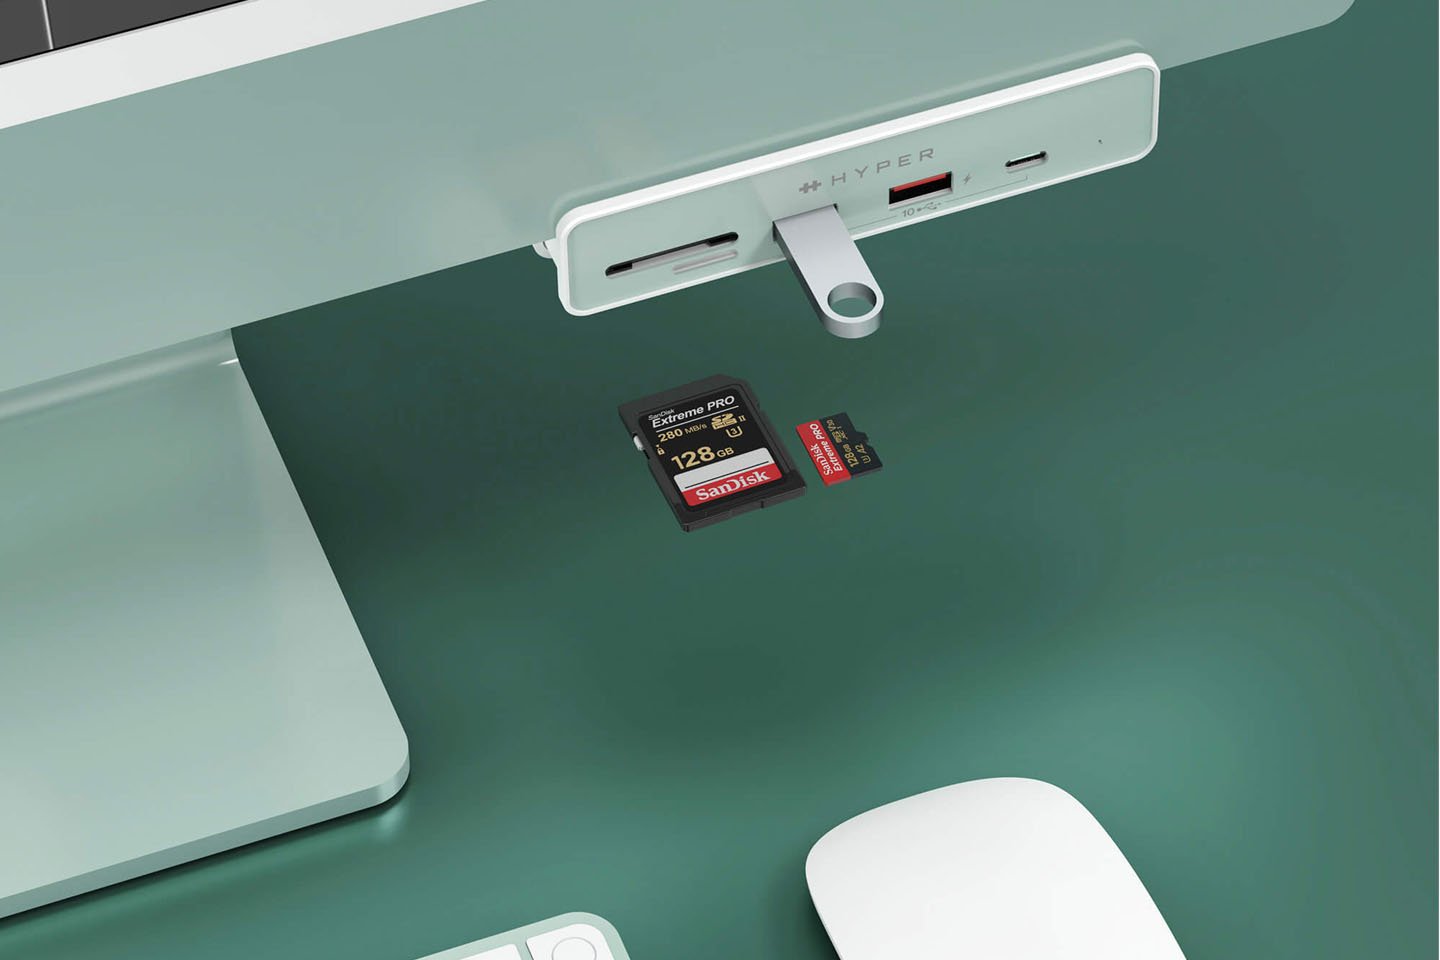 Luminans Byen kimplante Expand your iMac 24” connectivity with a front-facing USB hub that matches  your Apple device color! - Yanko Design